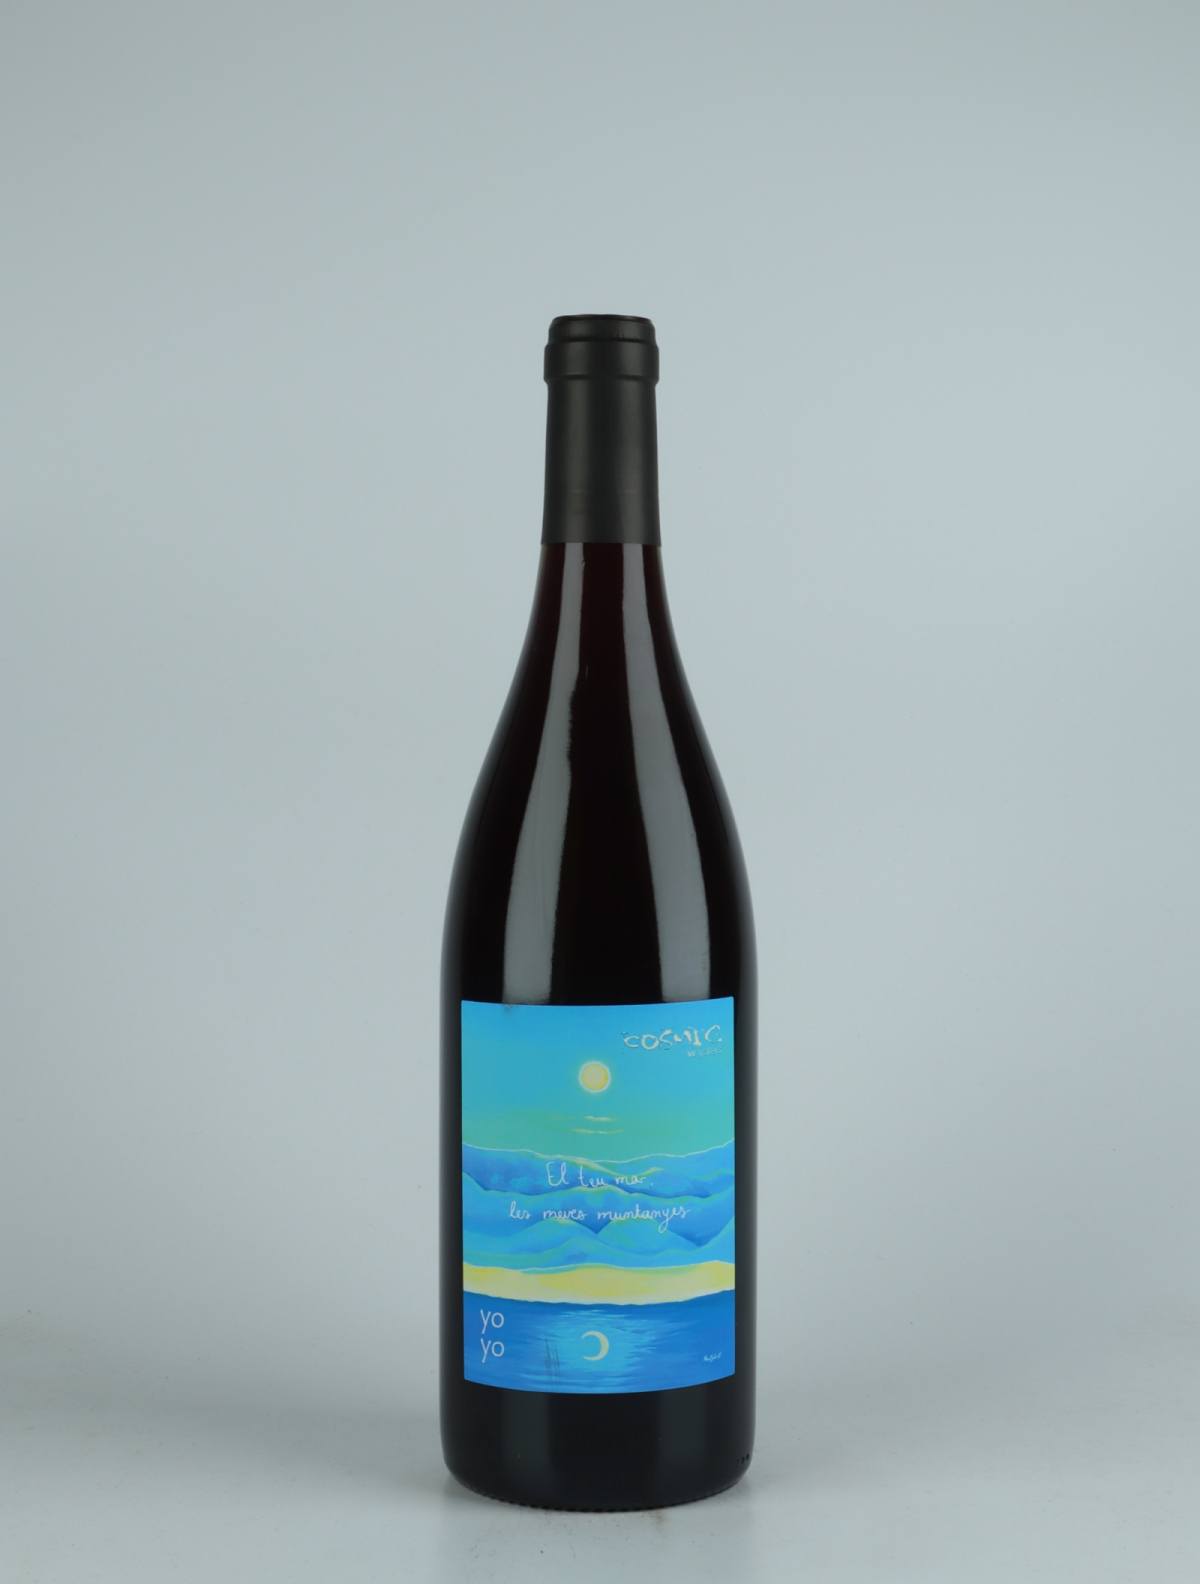 A bottle 2021 El teu mar, les meves muntanyes Red wine from Domaine Yoyo, Rousillon in France